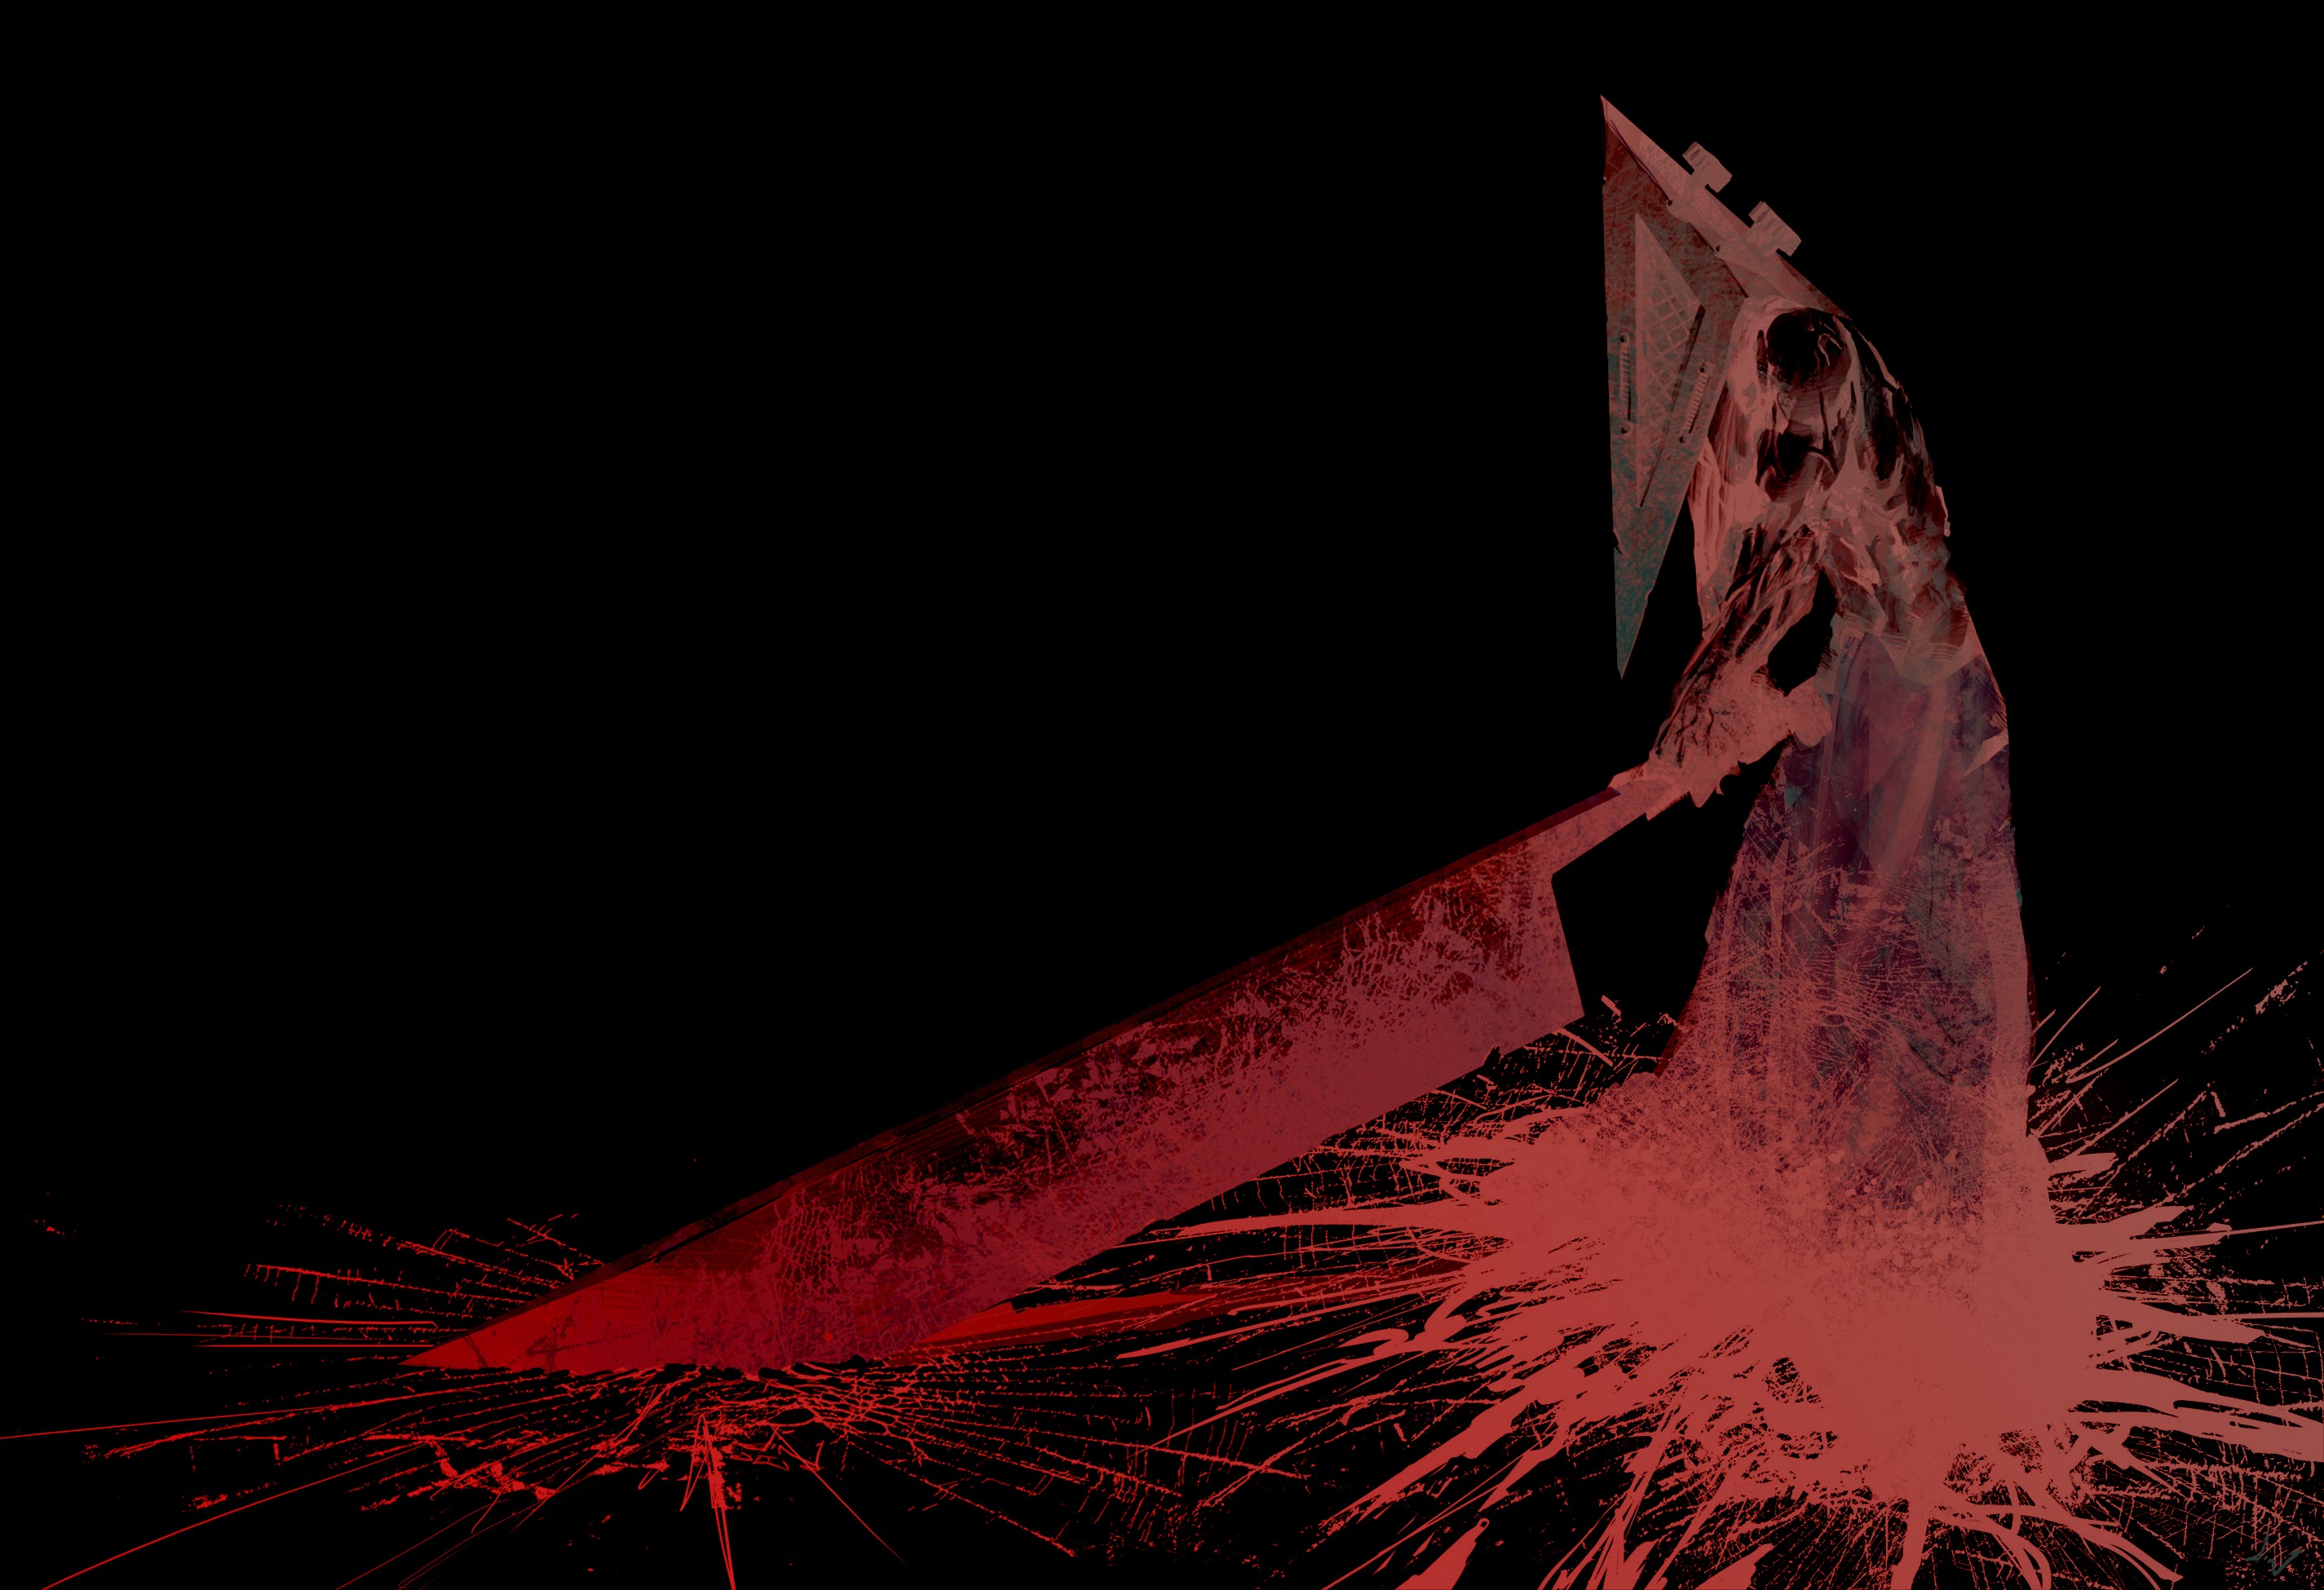 General 2850x1950 Silent Hill Pyramid Head minimalism video games video game art Video Game Horror blood weapon simple background black background